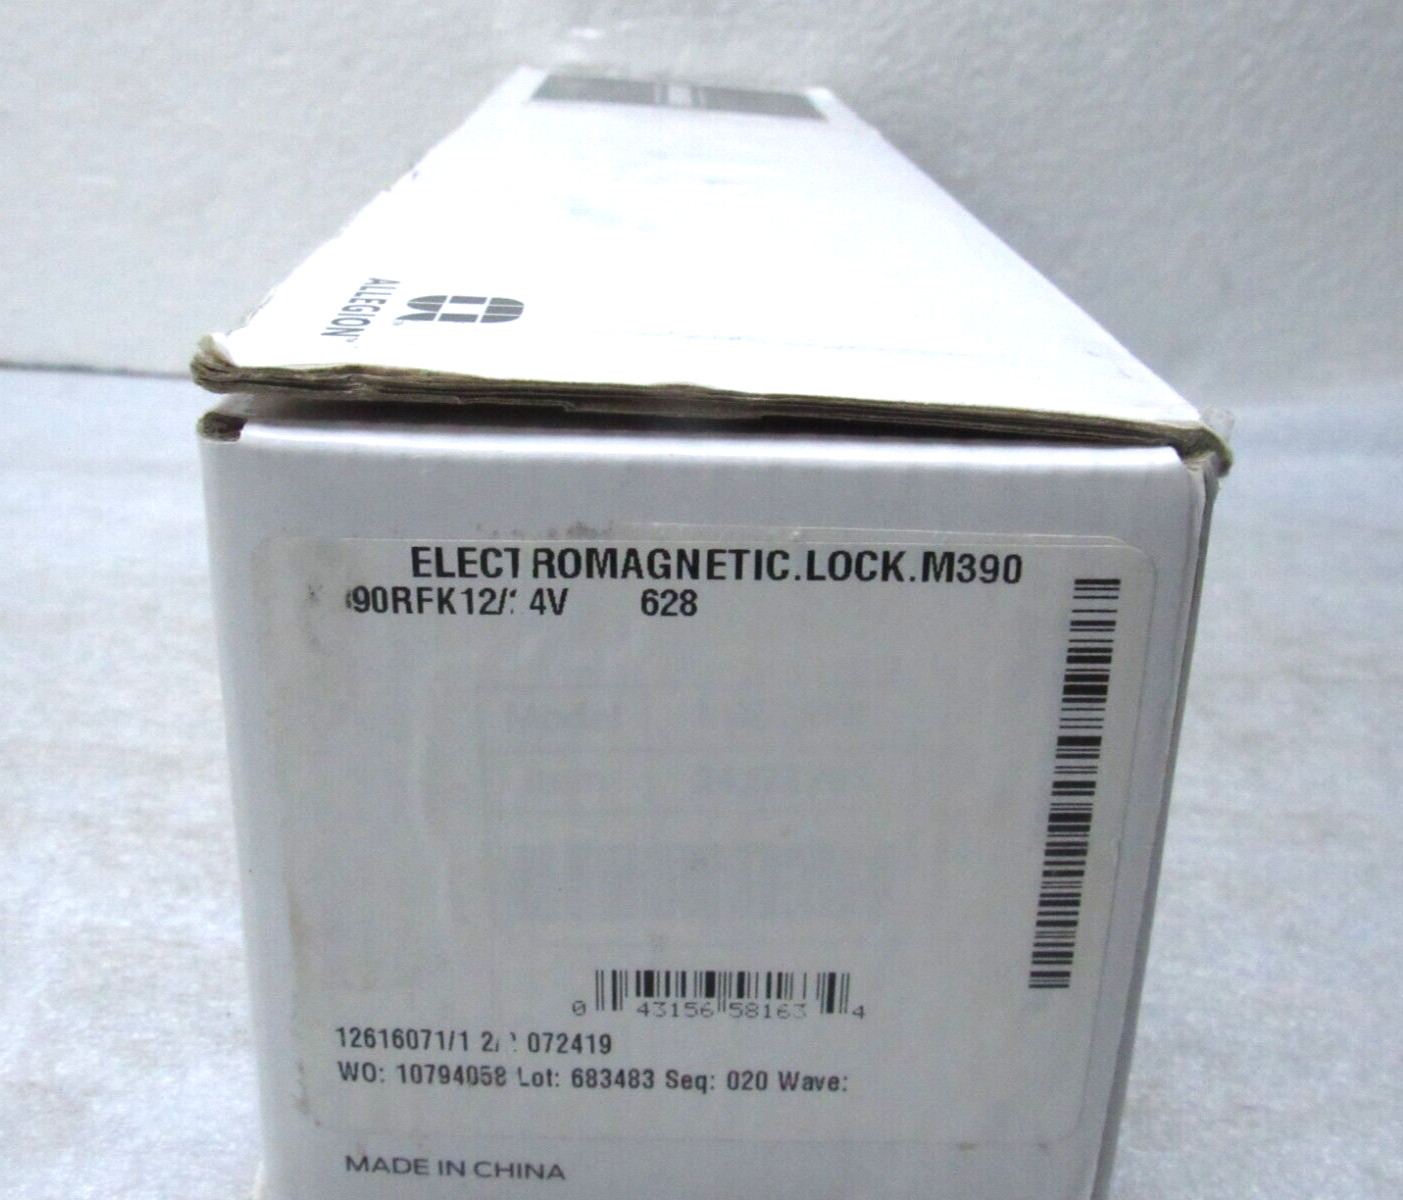 Schlage M390RFK 12/24V 628 Electromagnetic Lock, 1500 lbs HoldIng Force [CTCNC]